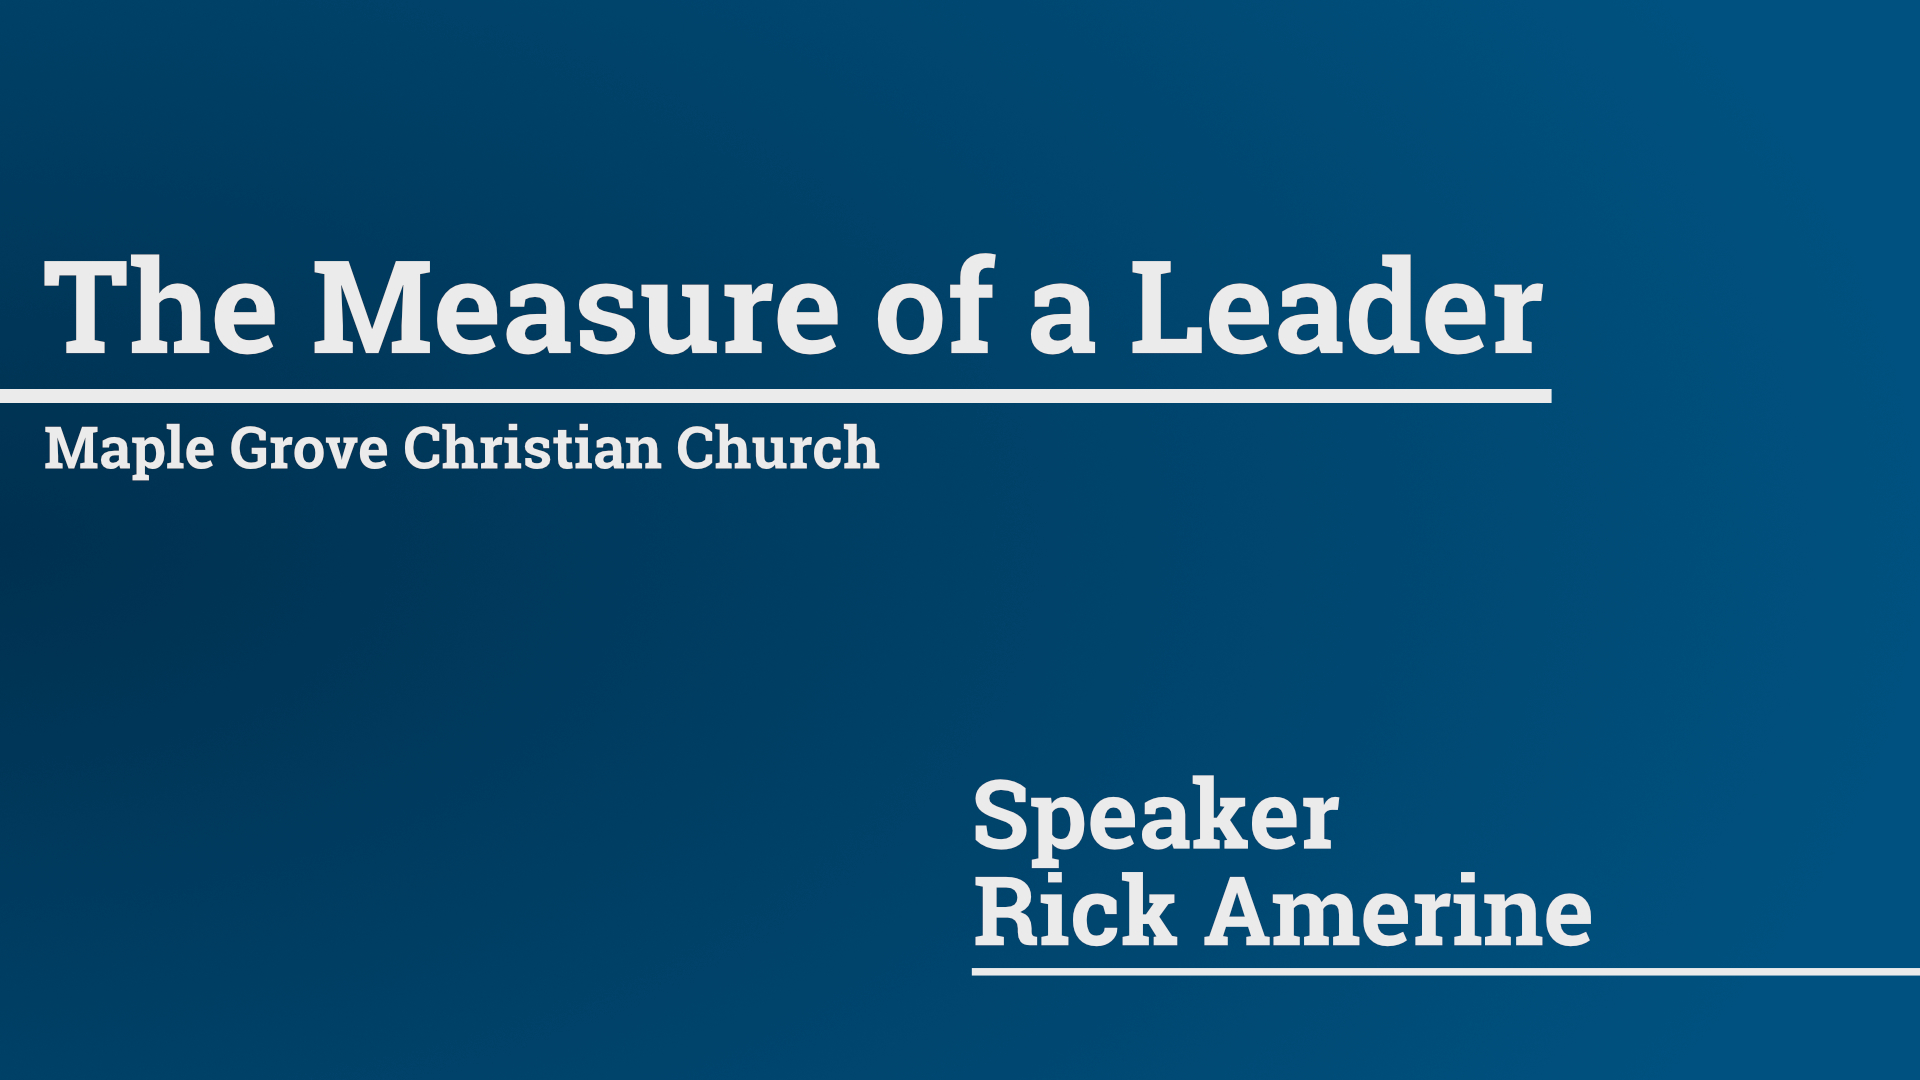 The Measure of a Leader • Feb. 21, 2016